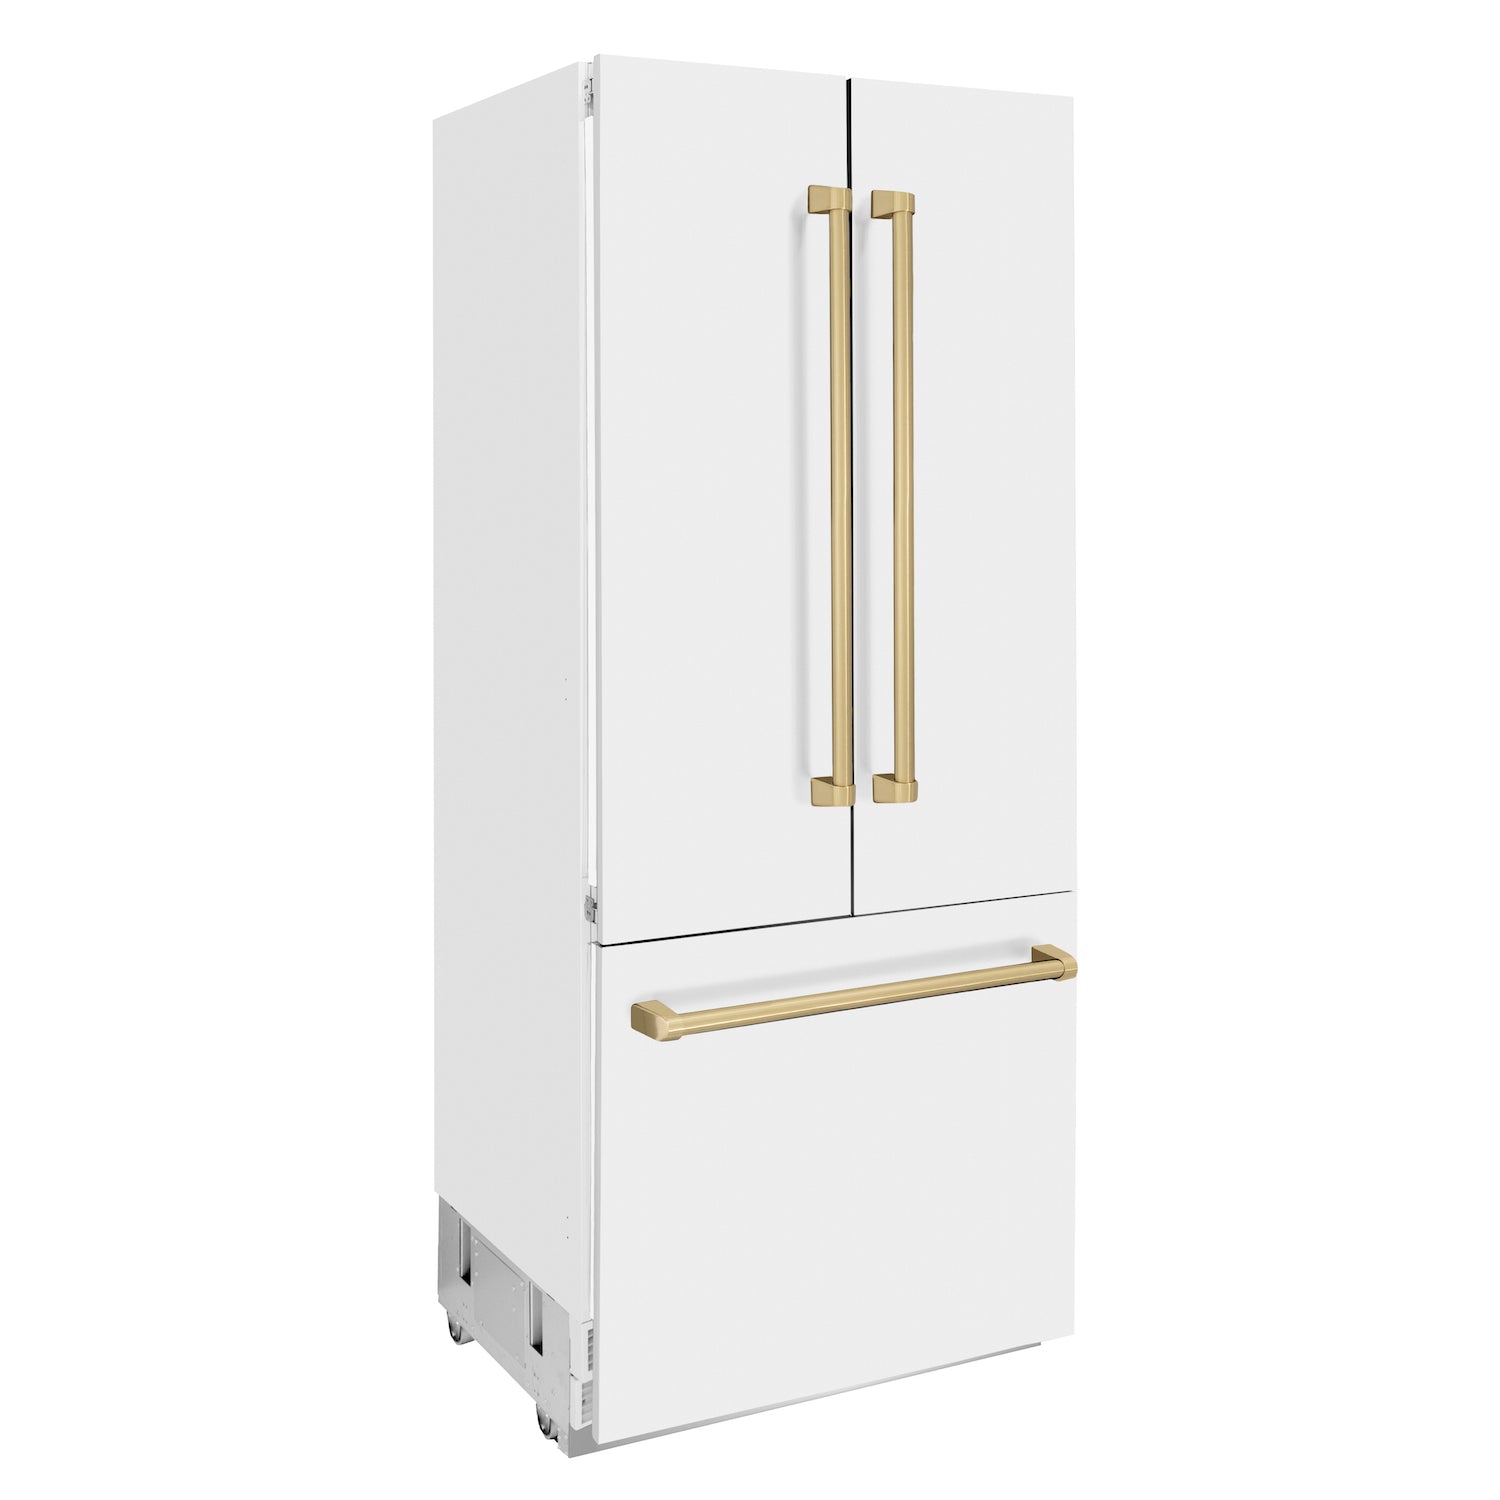 ZLINE Autograph Edition 36 in. 19.6 cu. ft. Built-in 2-Door Bottom Freezer Refrigerator with Internal Water and Ice Dispenser in White Matte with Champagne Bronze Accents (RBIVZ-WM-36-CB) side, closed.